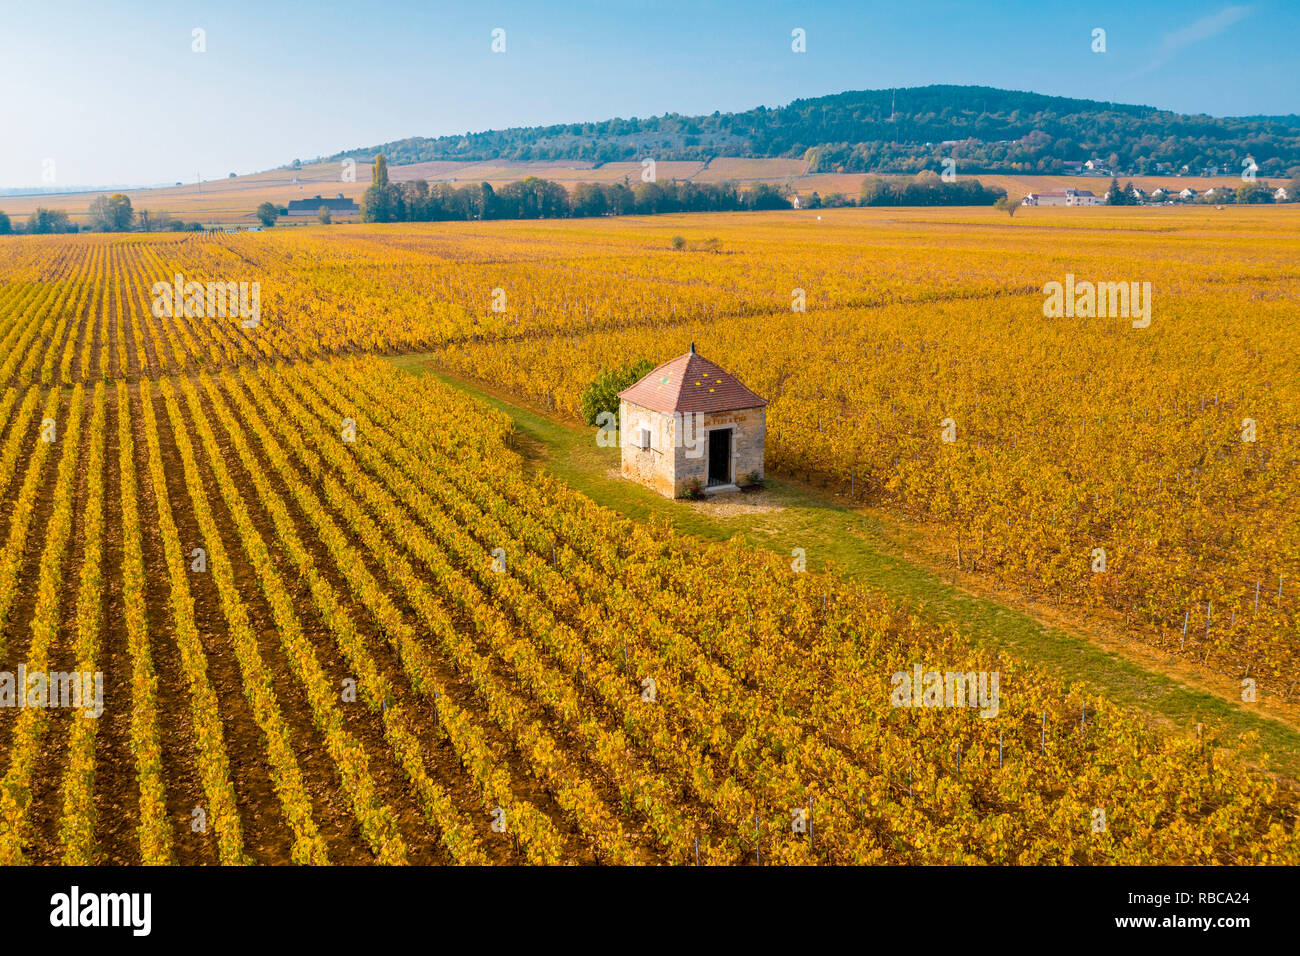 France, Bourgogne-Franche-Comte, Burgundy, Cote-d'Or, Cote de Beaune. Typical barn in the vineyards. Stock Photo